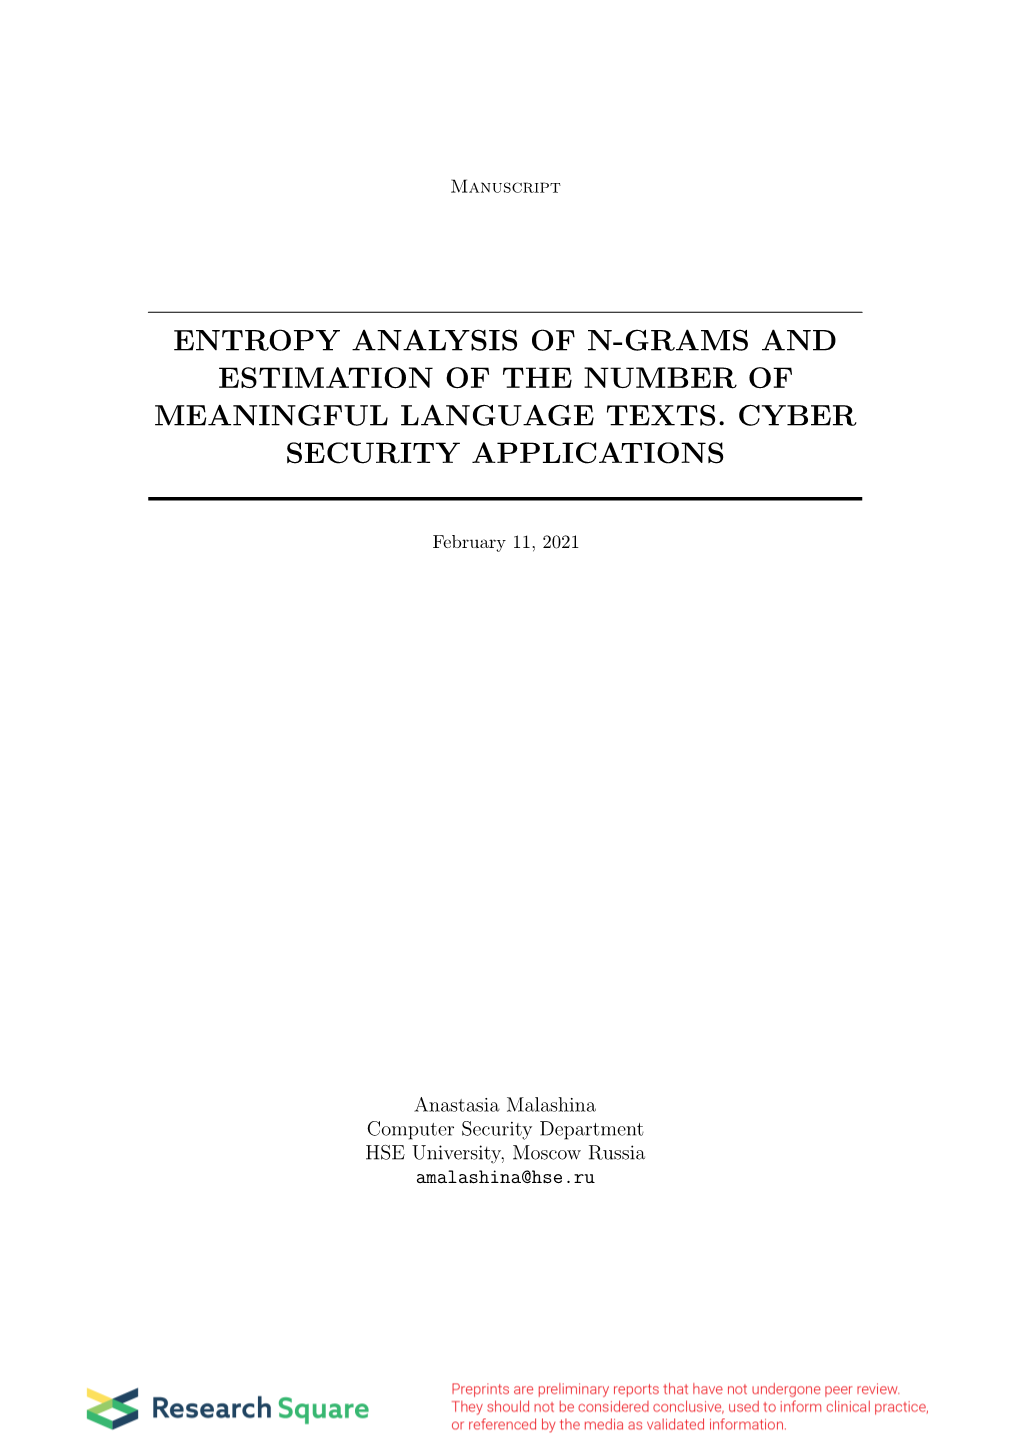 Entropy Analysis of N-Grams and Estimation of the Number of Meaningful Language Texts. Cyber Security Applications